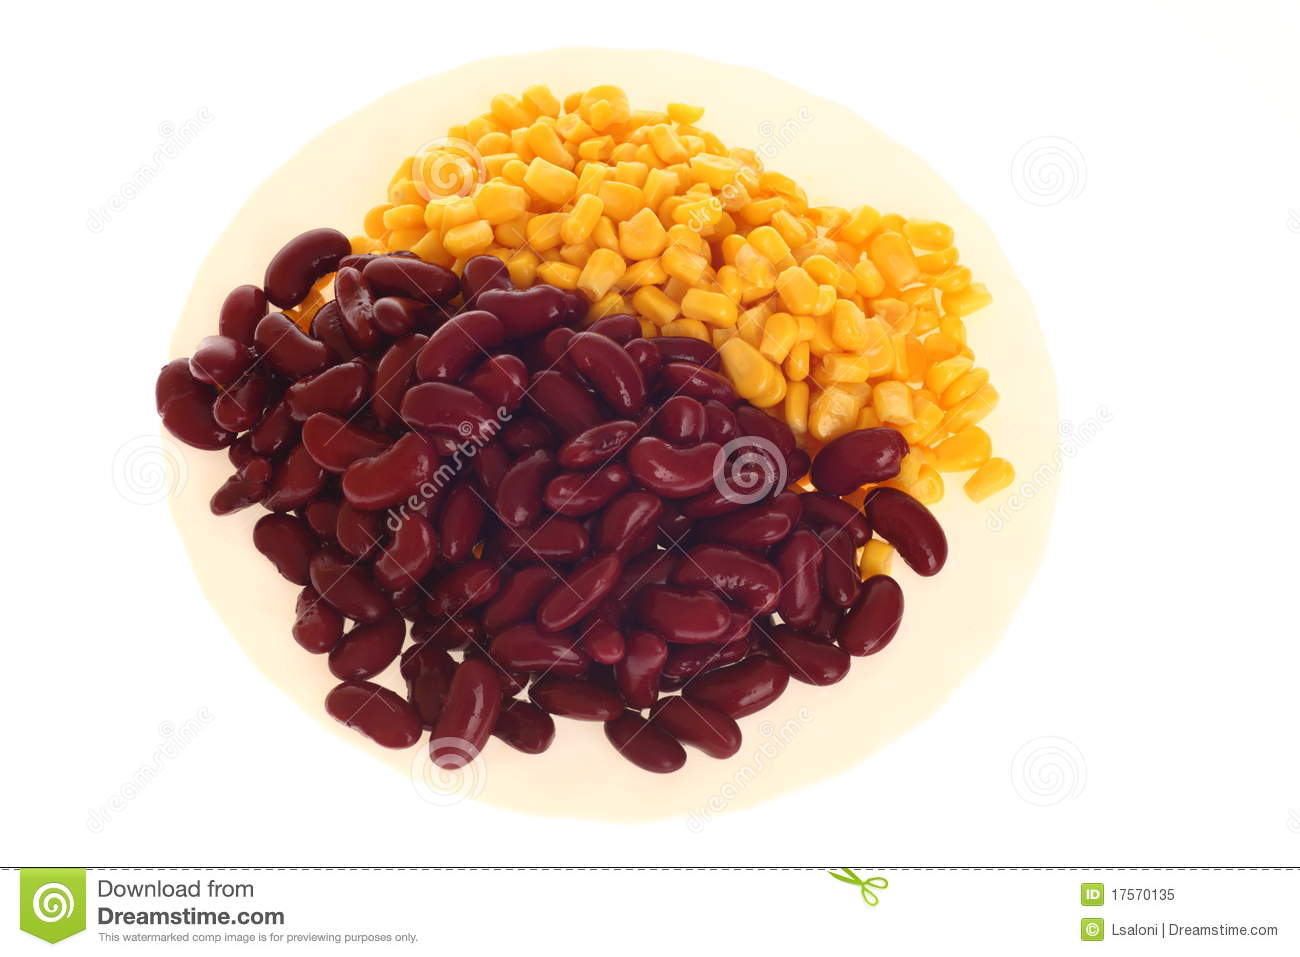 Corn And Baked Beans On Plate Royalty Free Stock Photo   Image    